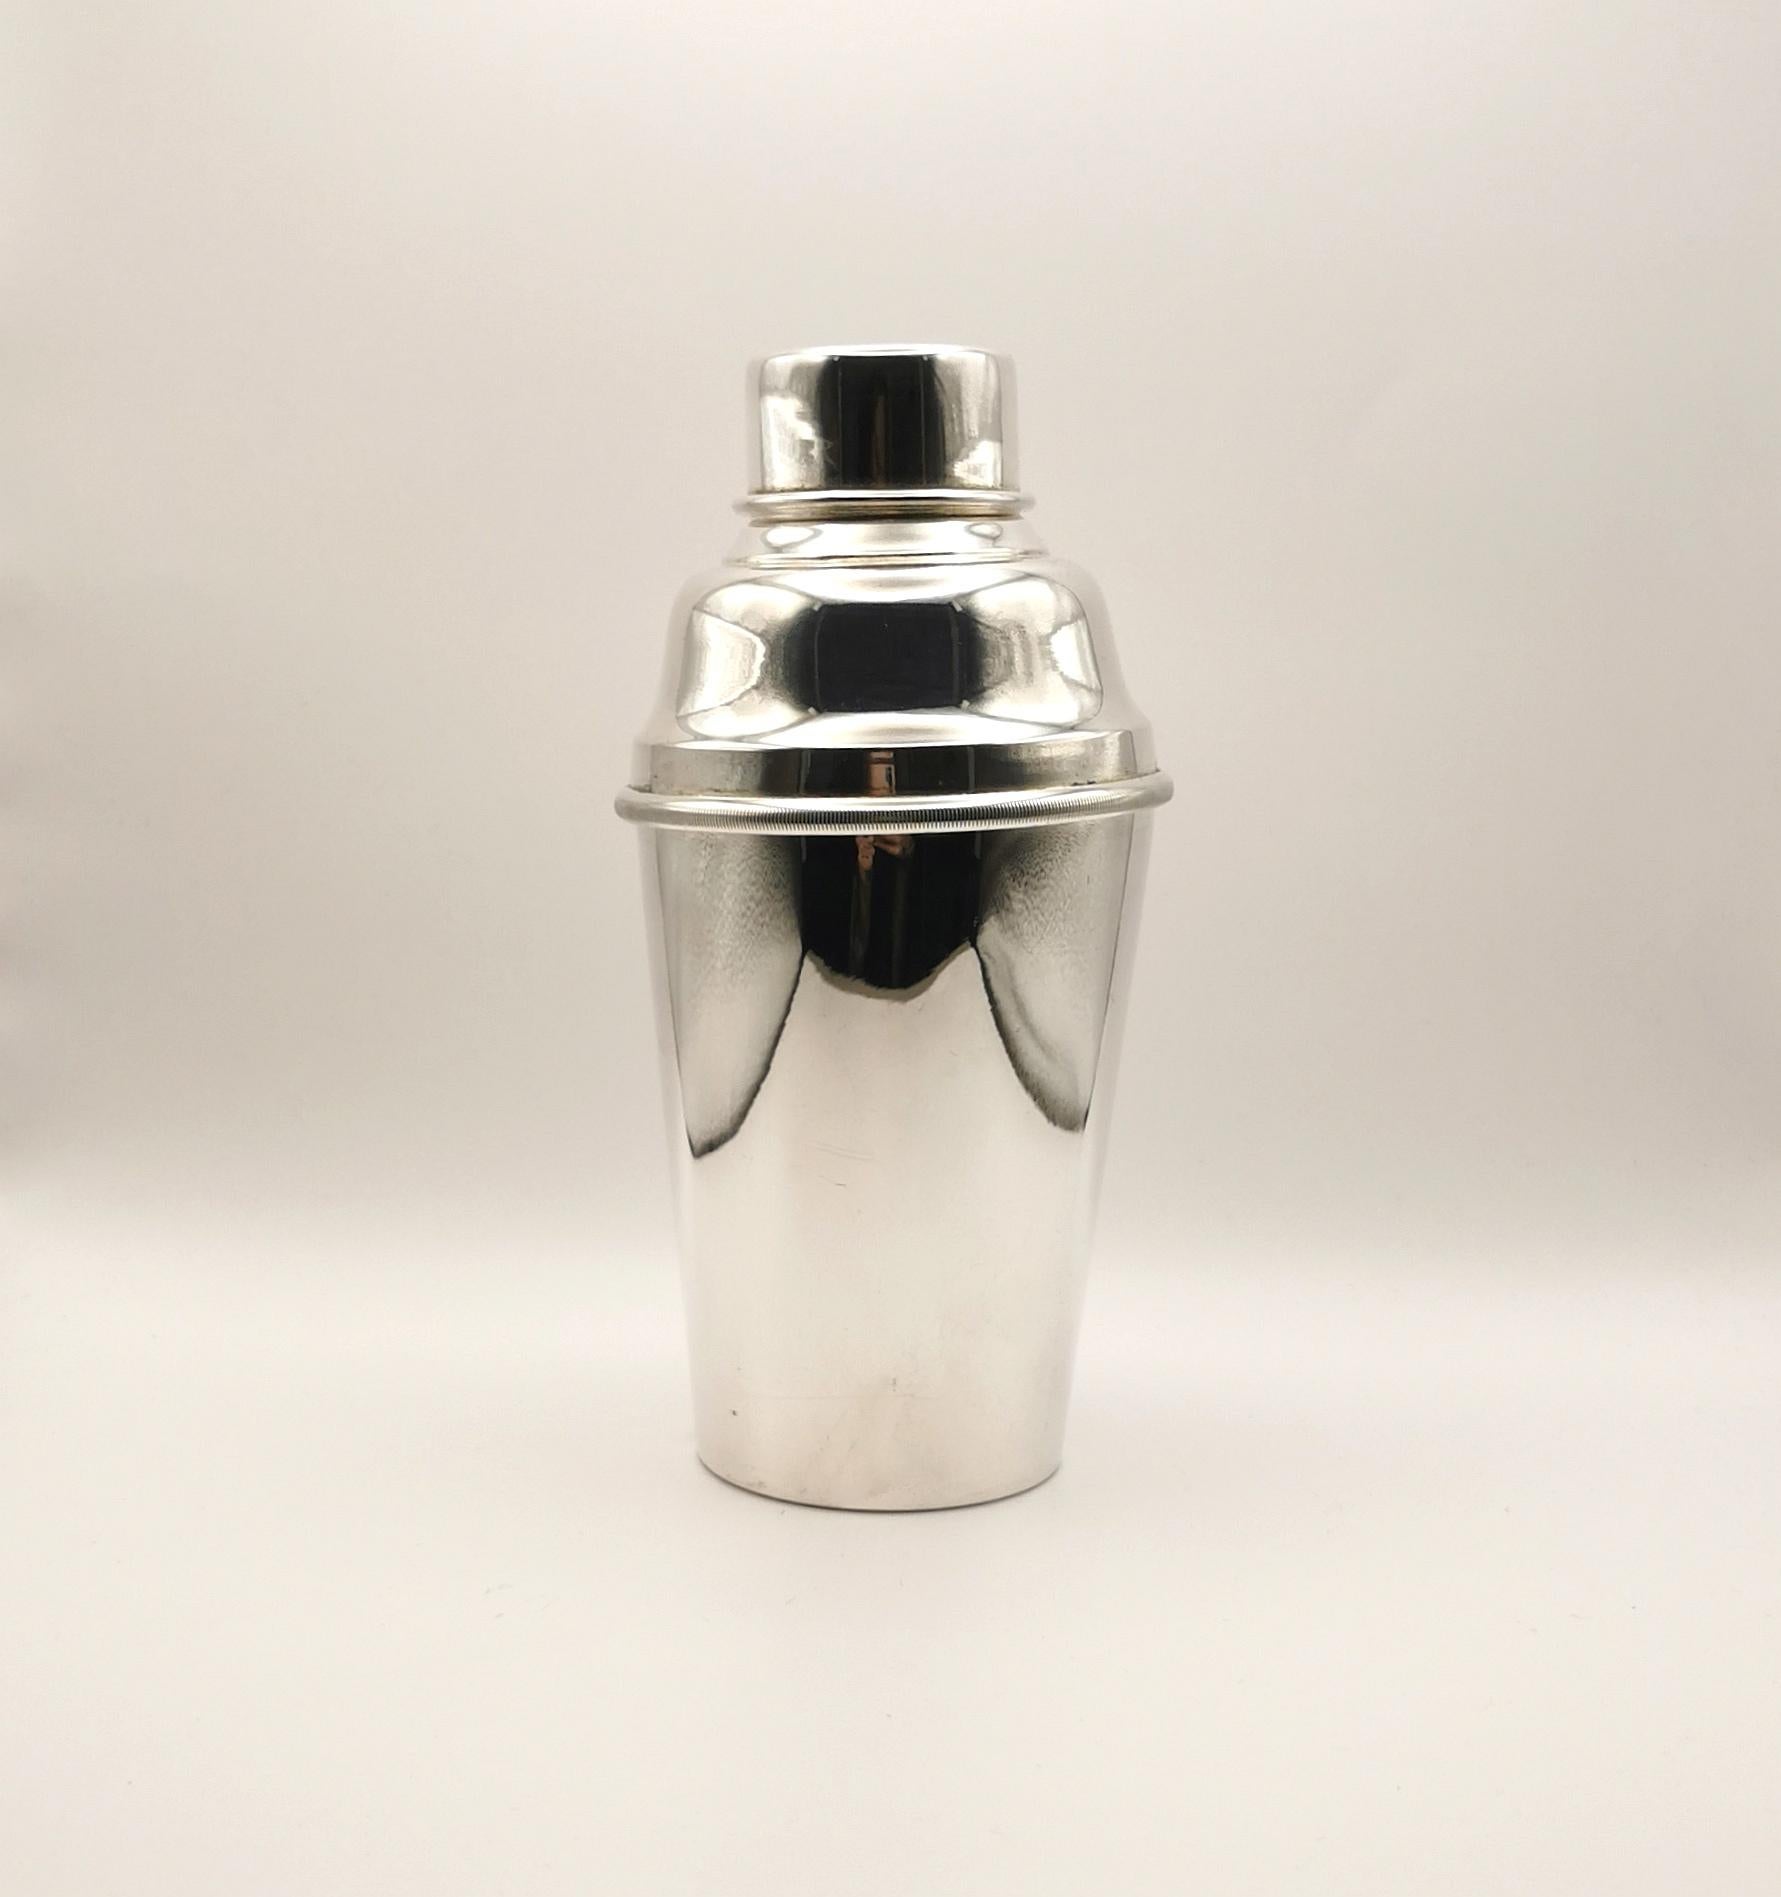 An attractive vintage Art Deco era silver plated cocktail shaker by Mappin and Webb.

The perfect accompaniment to the vintage bar, adding a touch of Art Deco glam to your collection.

It is made from silver plated metal and has an outer lid that